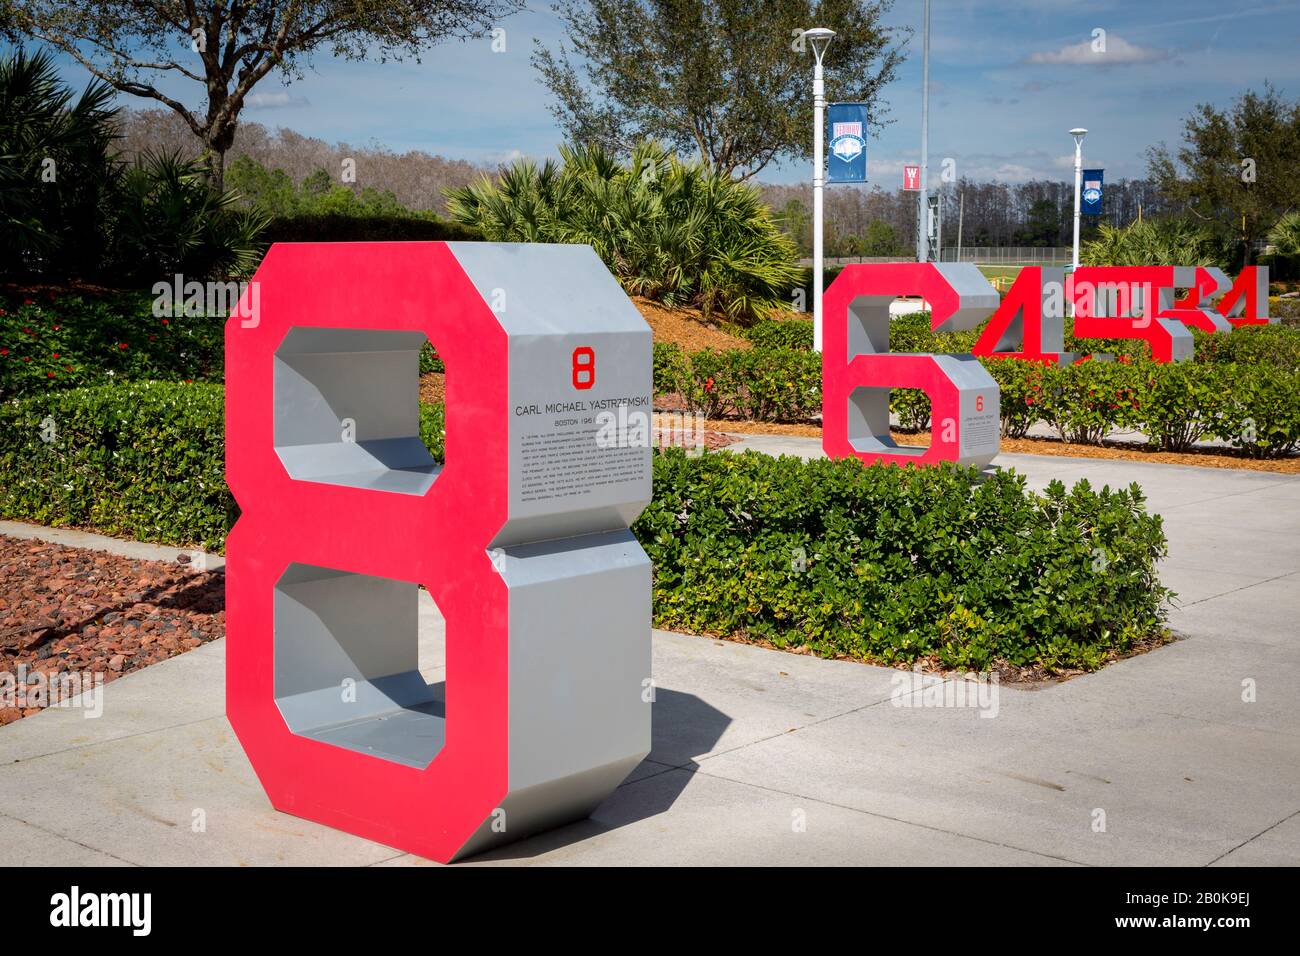 Retired numbers of past players for the Boston Red Sox at JetBlue Park - Red Sox spring training facility, Ft Myers, Florida, USA Stock Photo